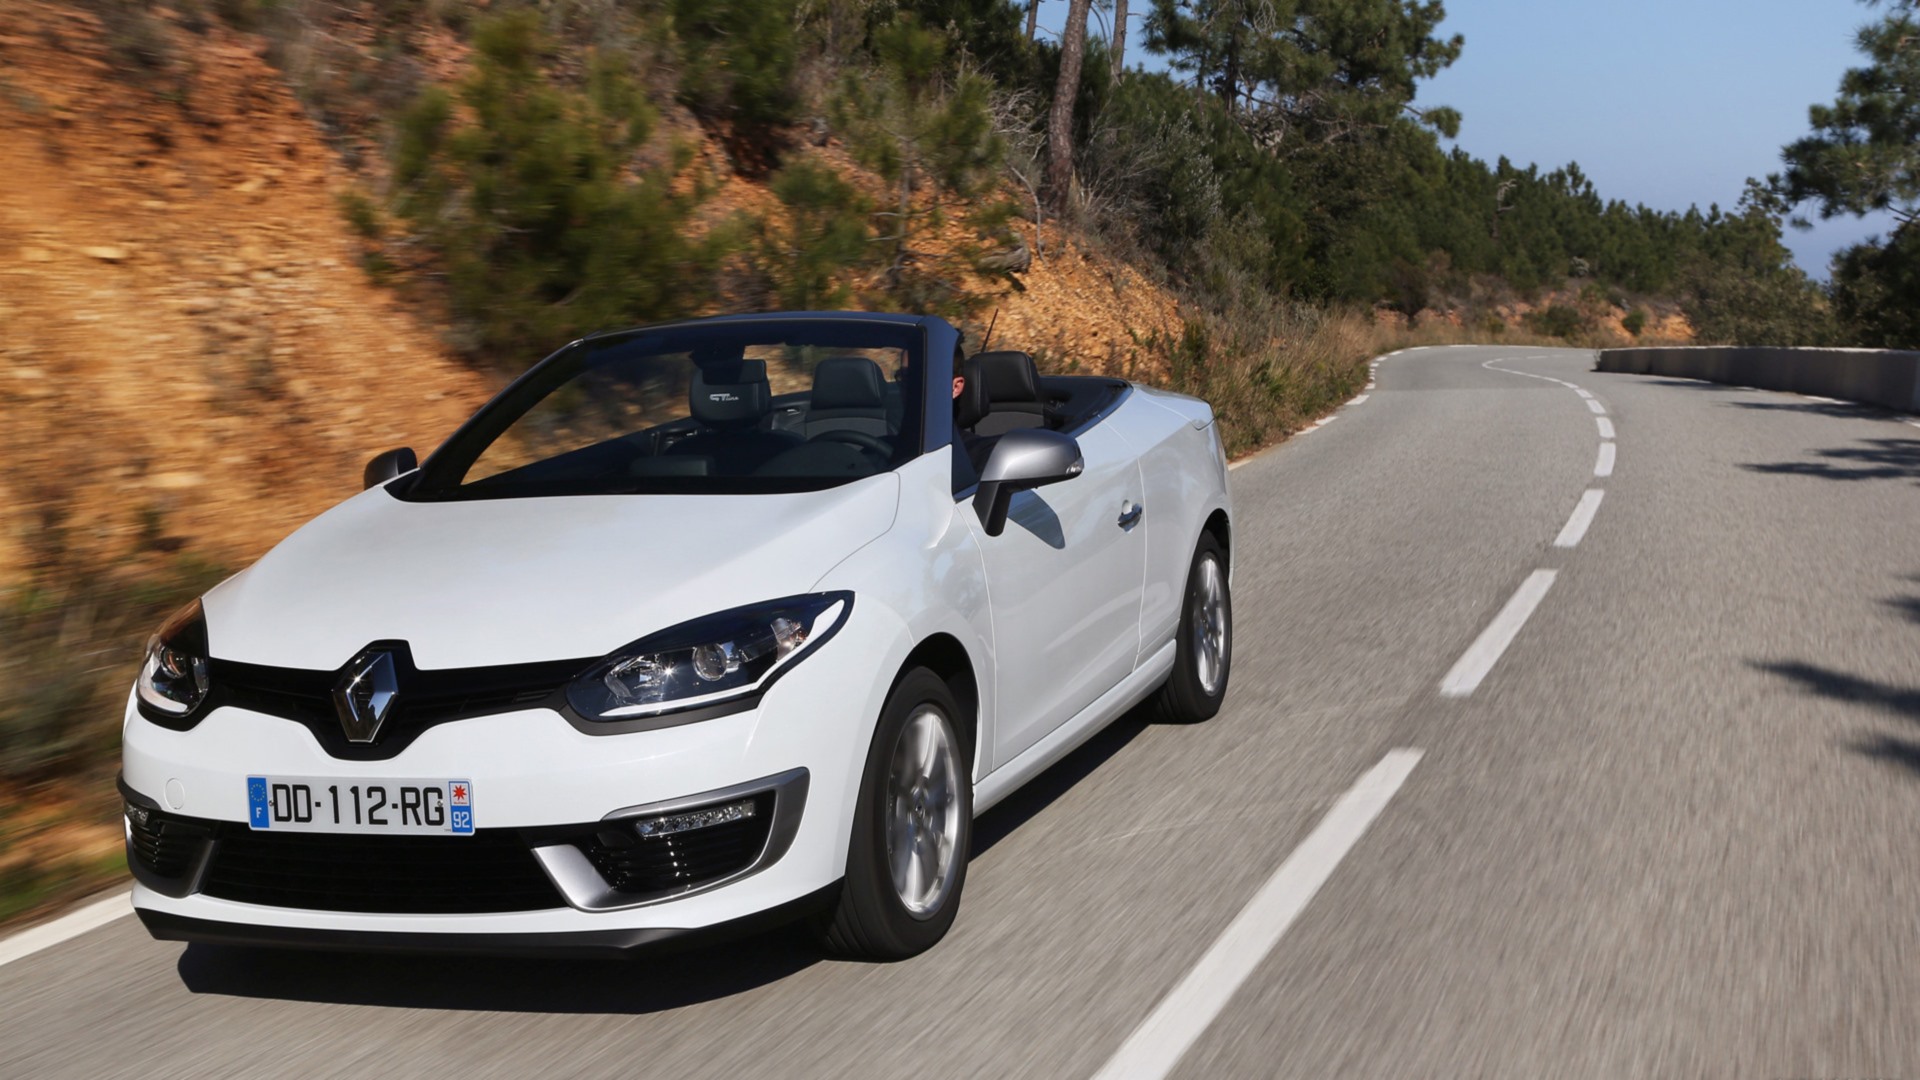 2015 Renault Megane Coupe-Cabriolet Wallpapers